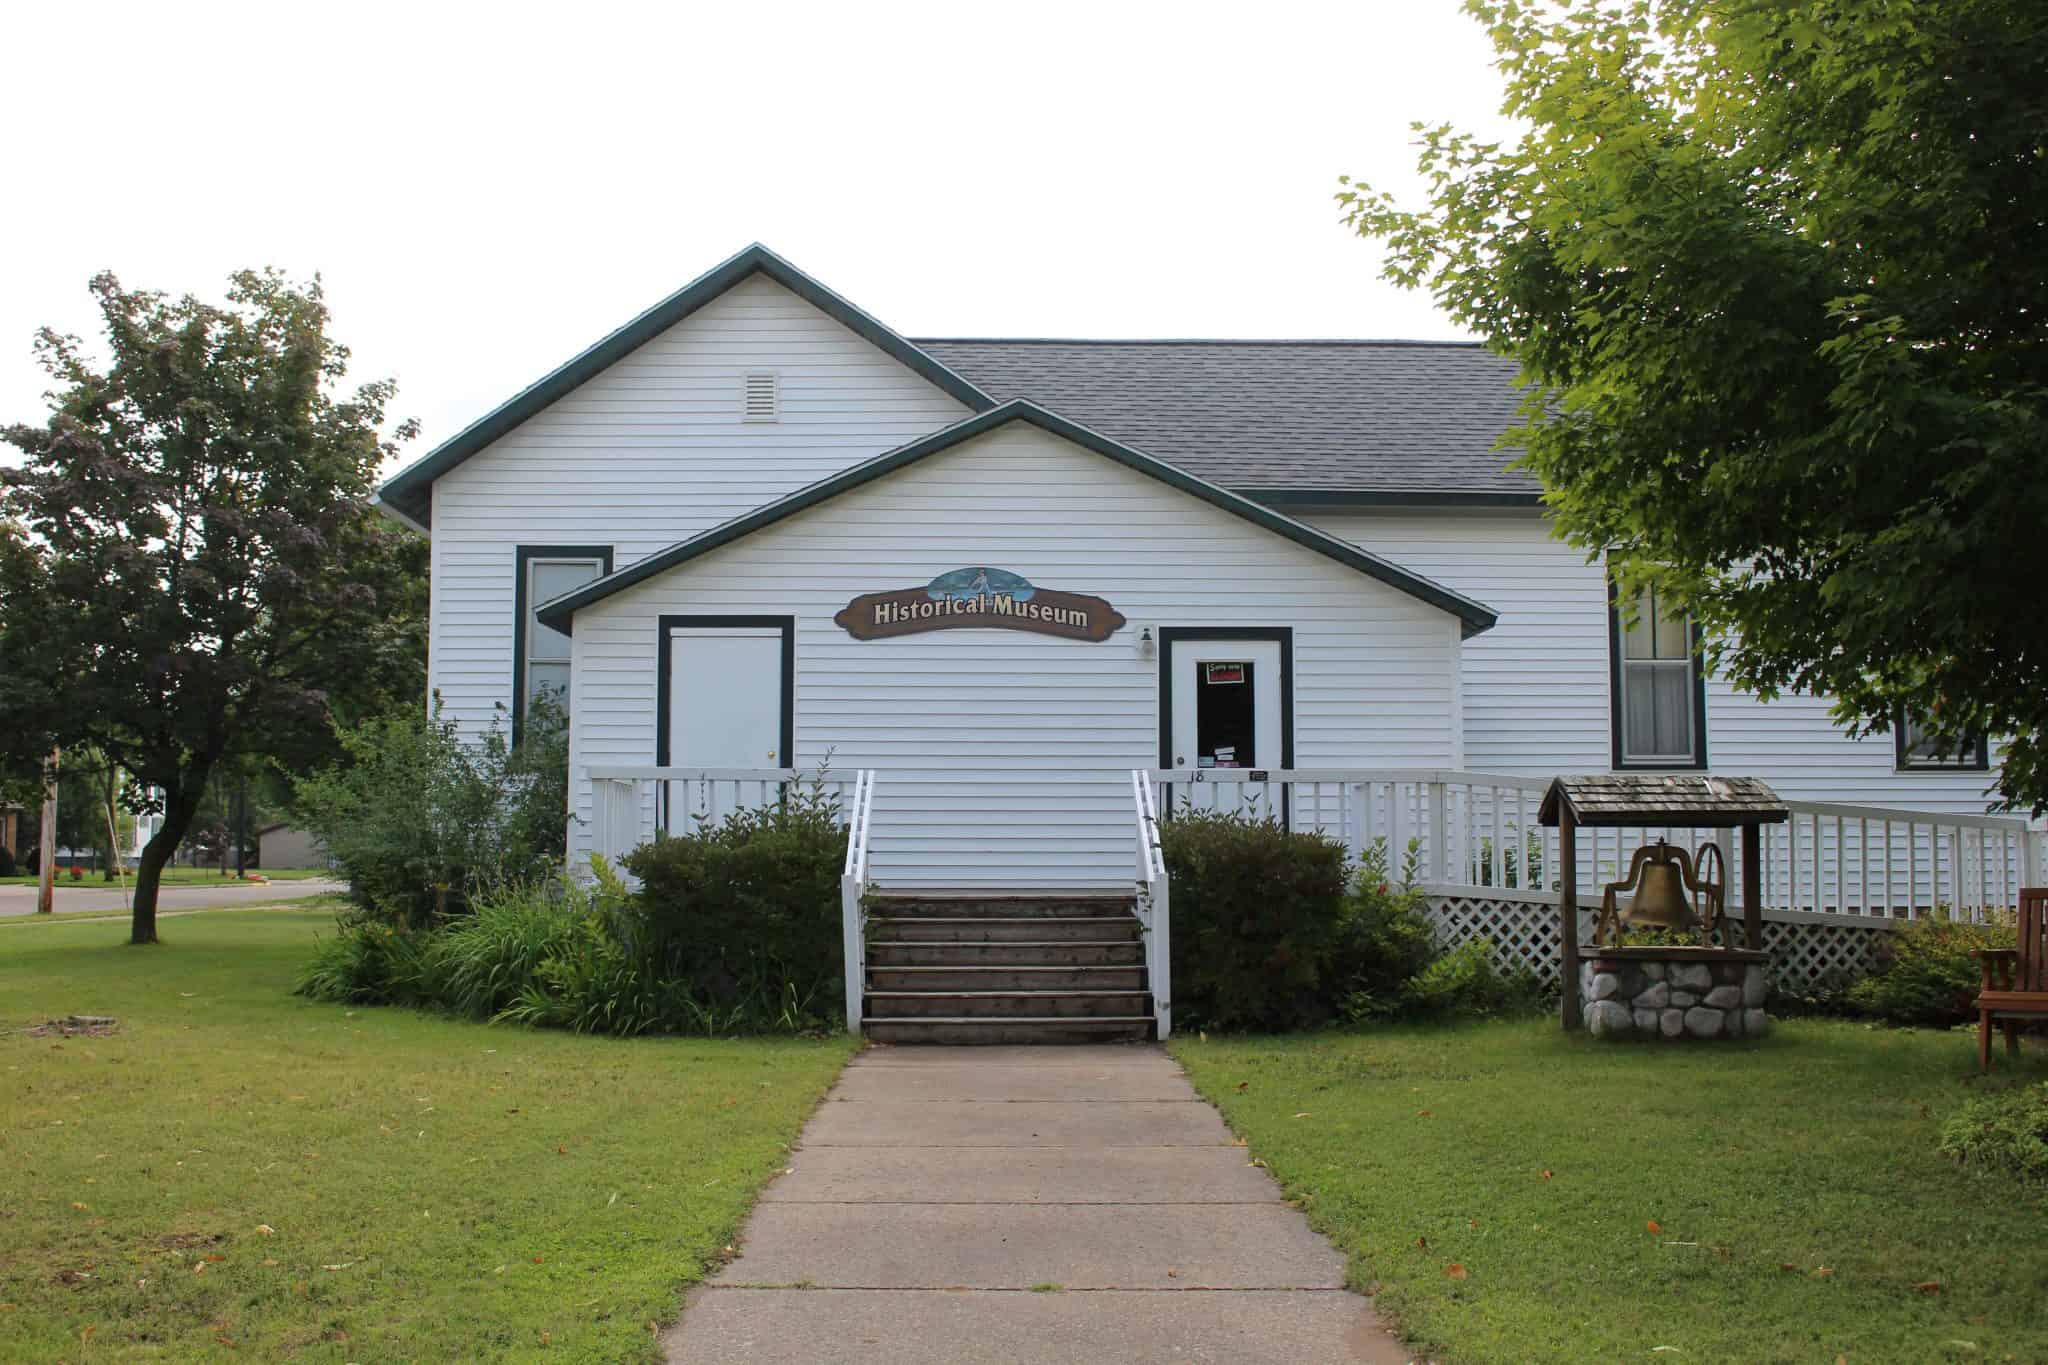 Tomahawk Area Historical Society opening June 29